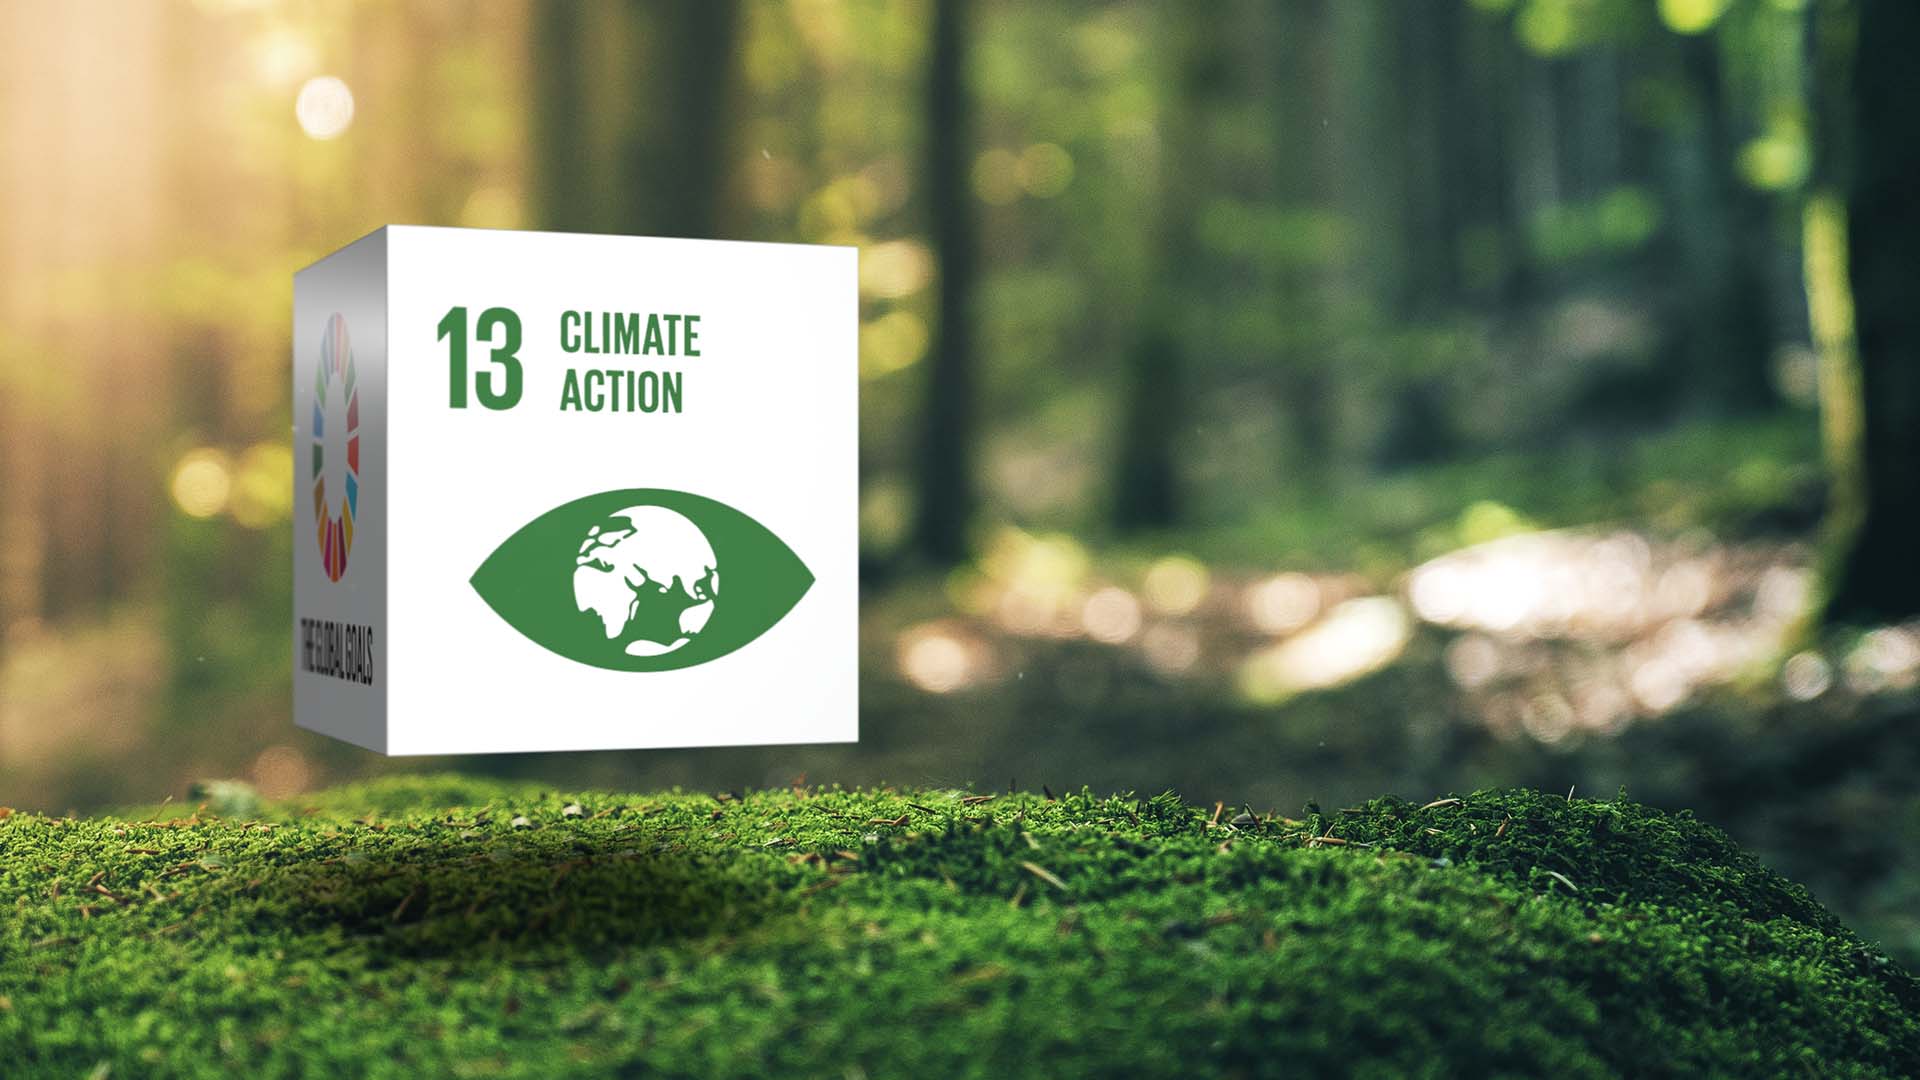 Climate action goal 13